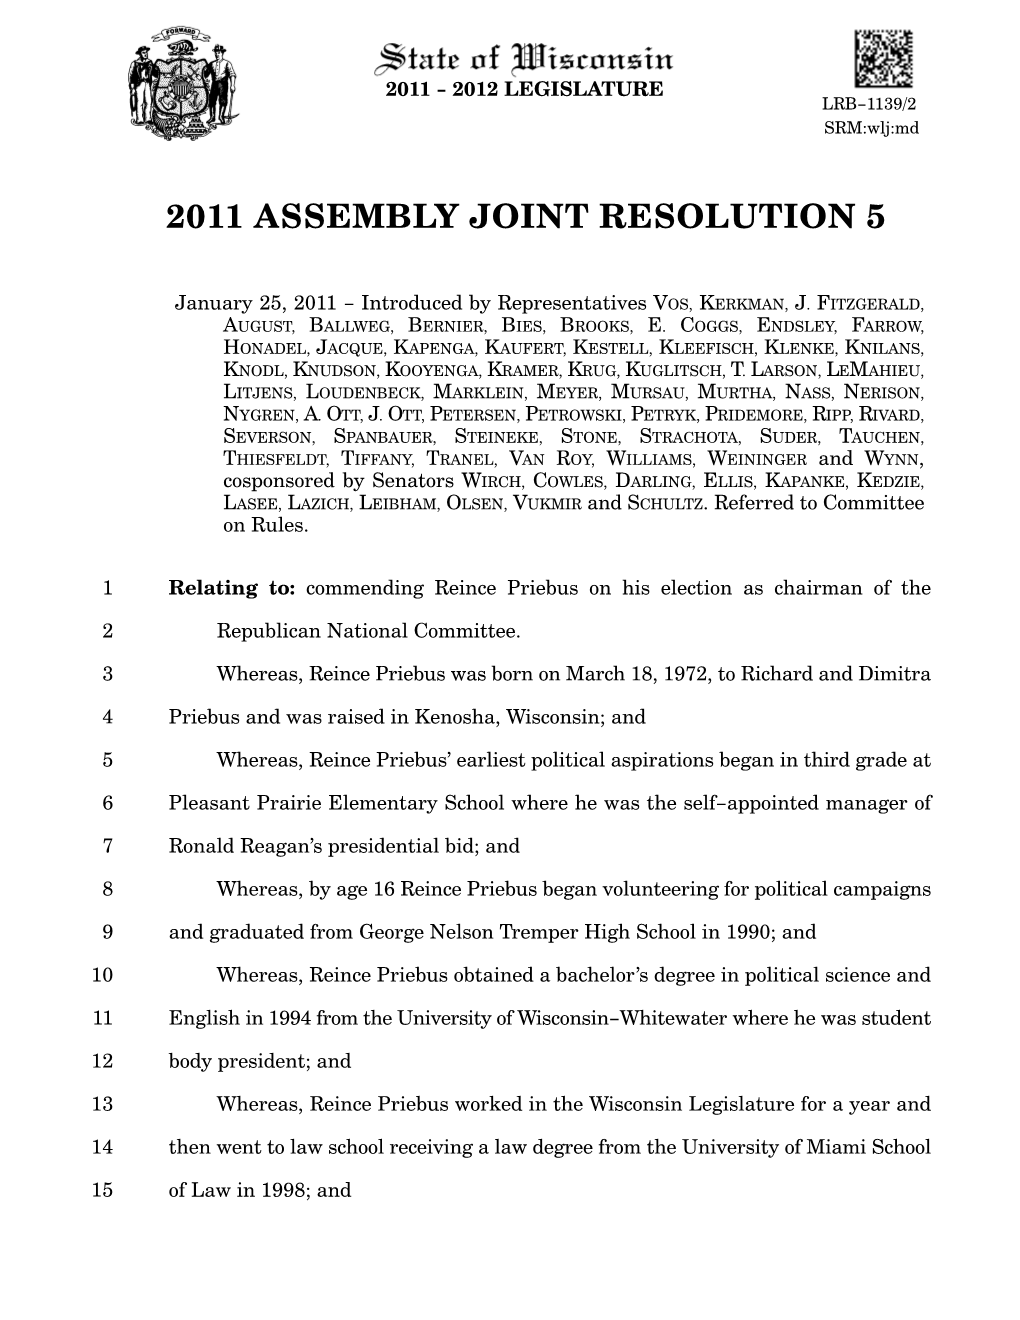 2011 Assembly Joint Resolution 5